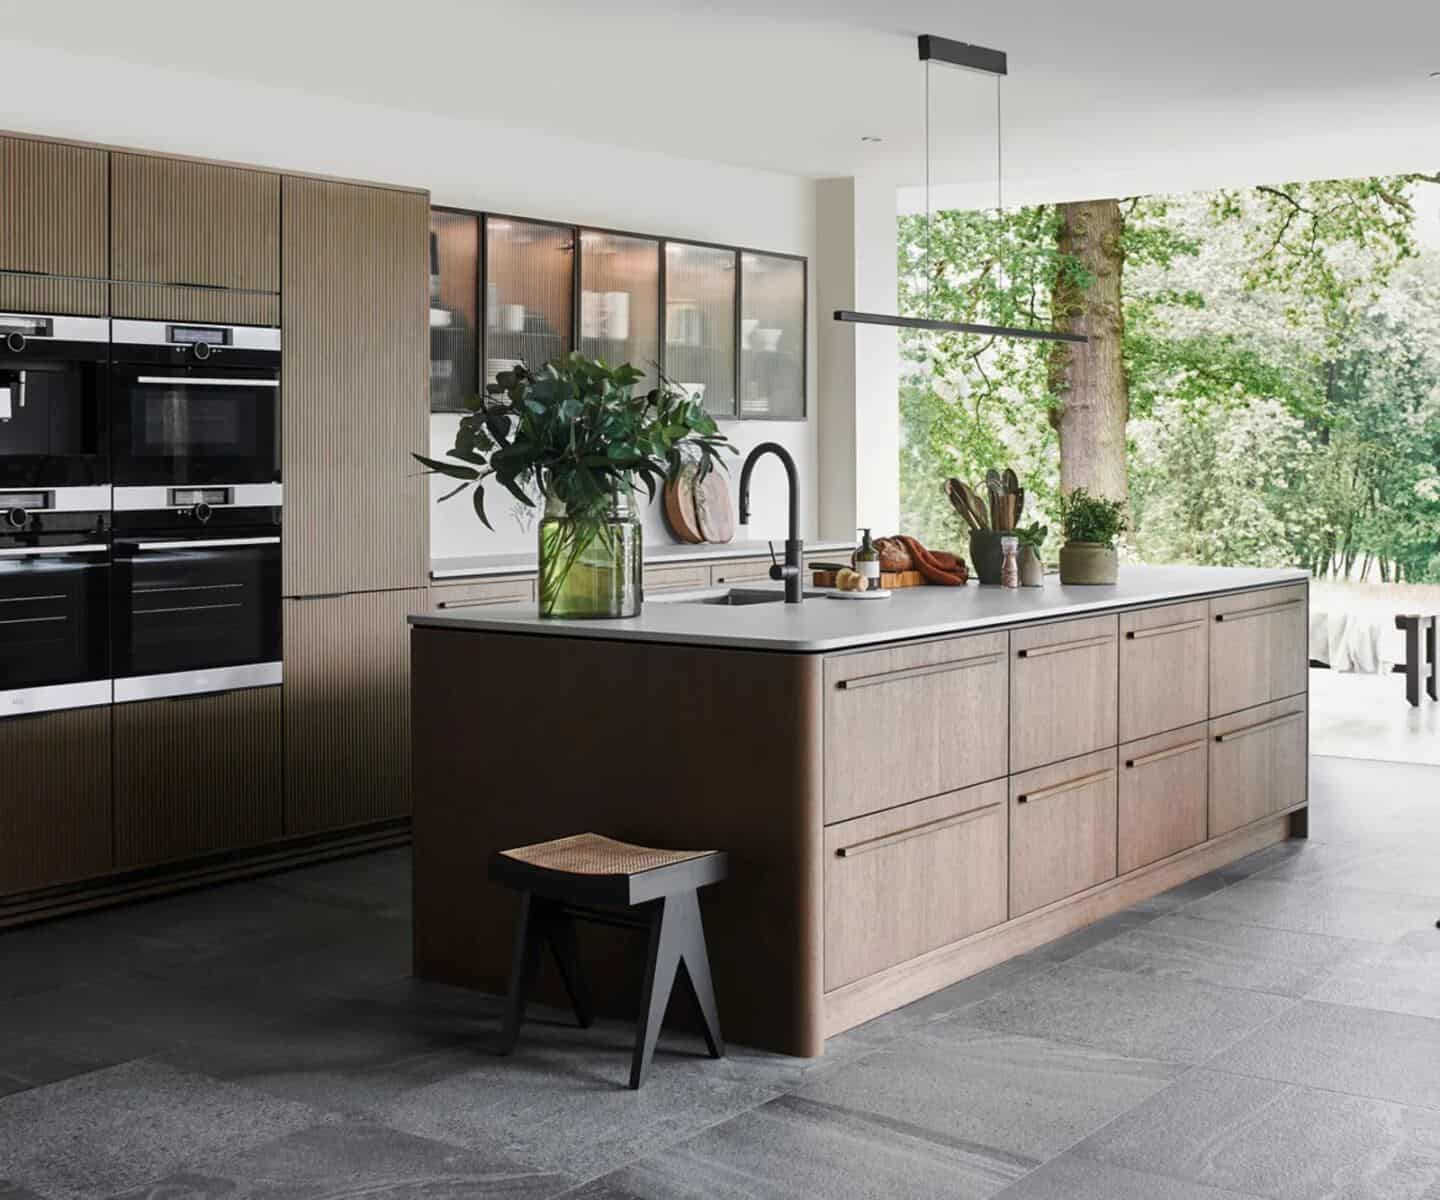 A wooden kitchen with island overlooking a leafy garden